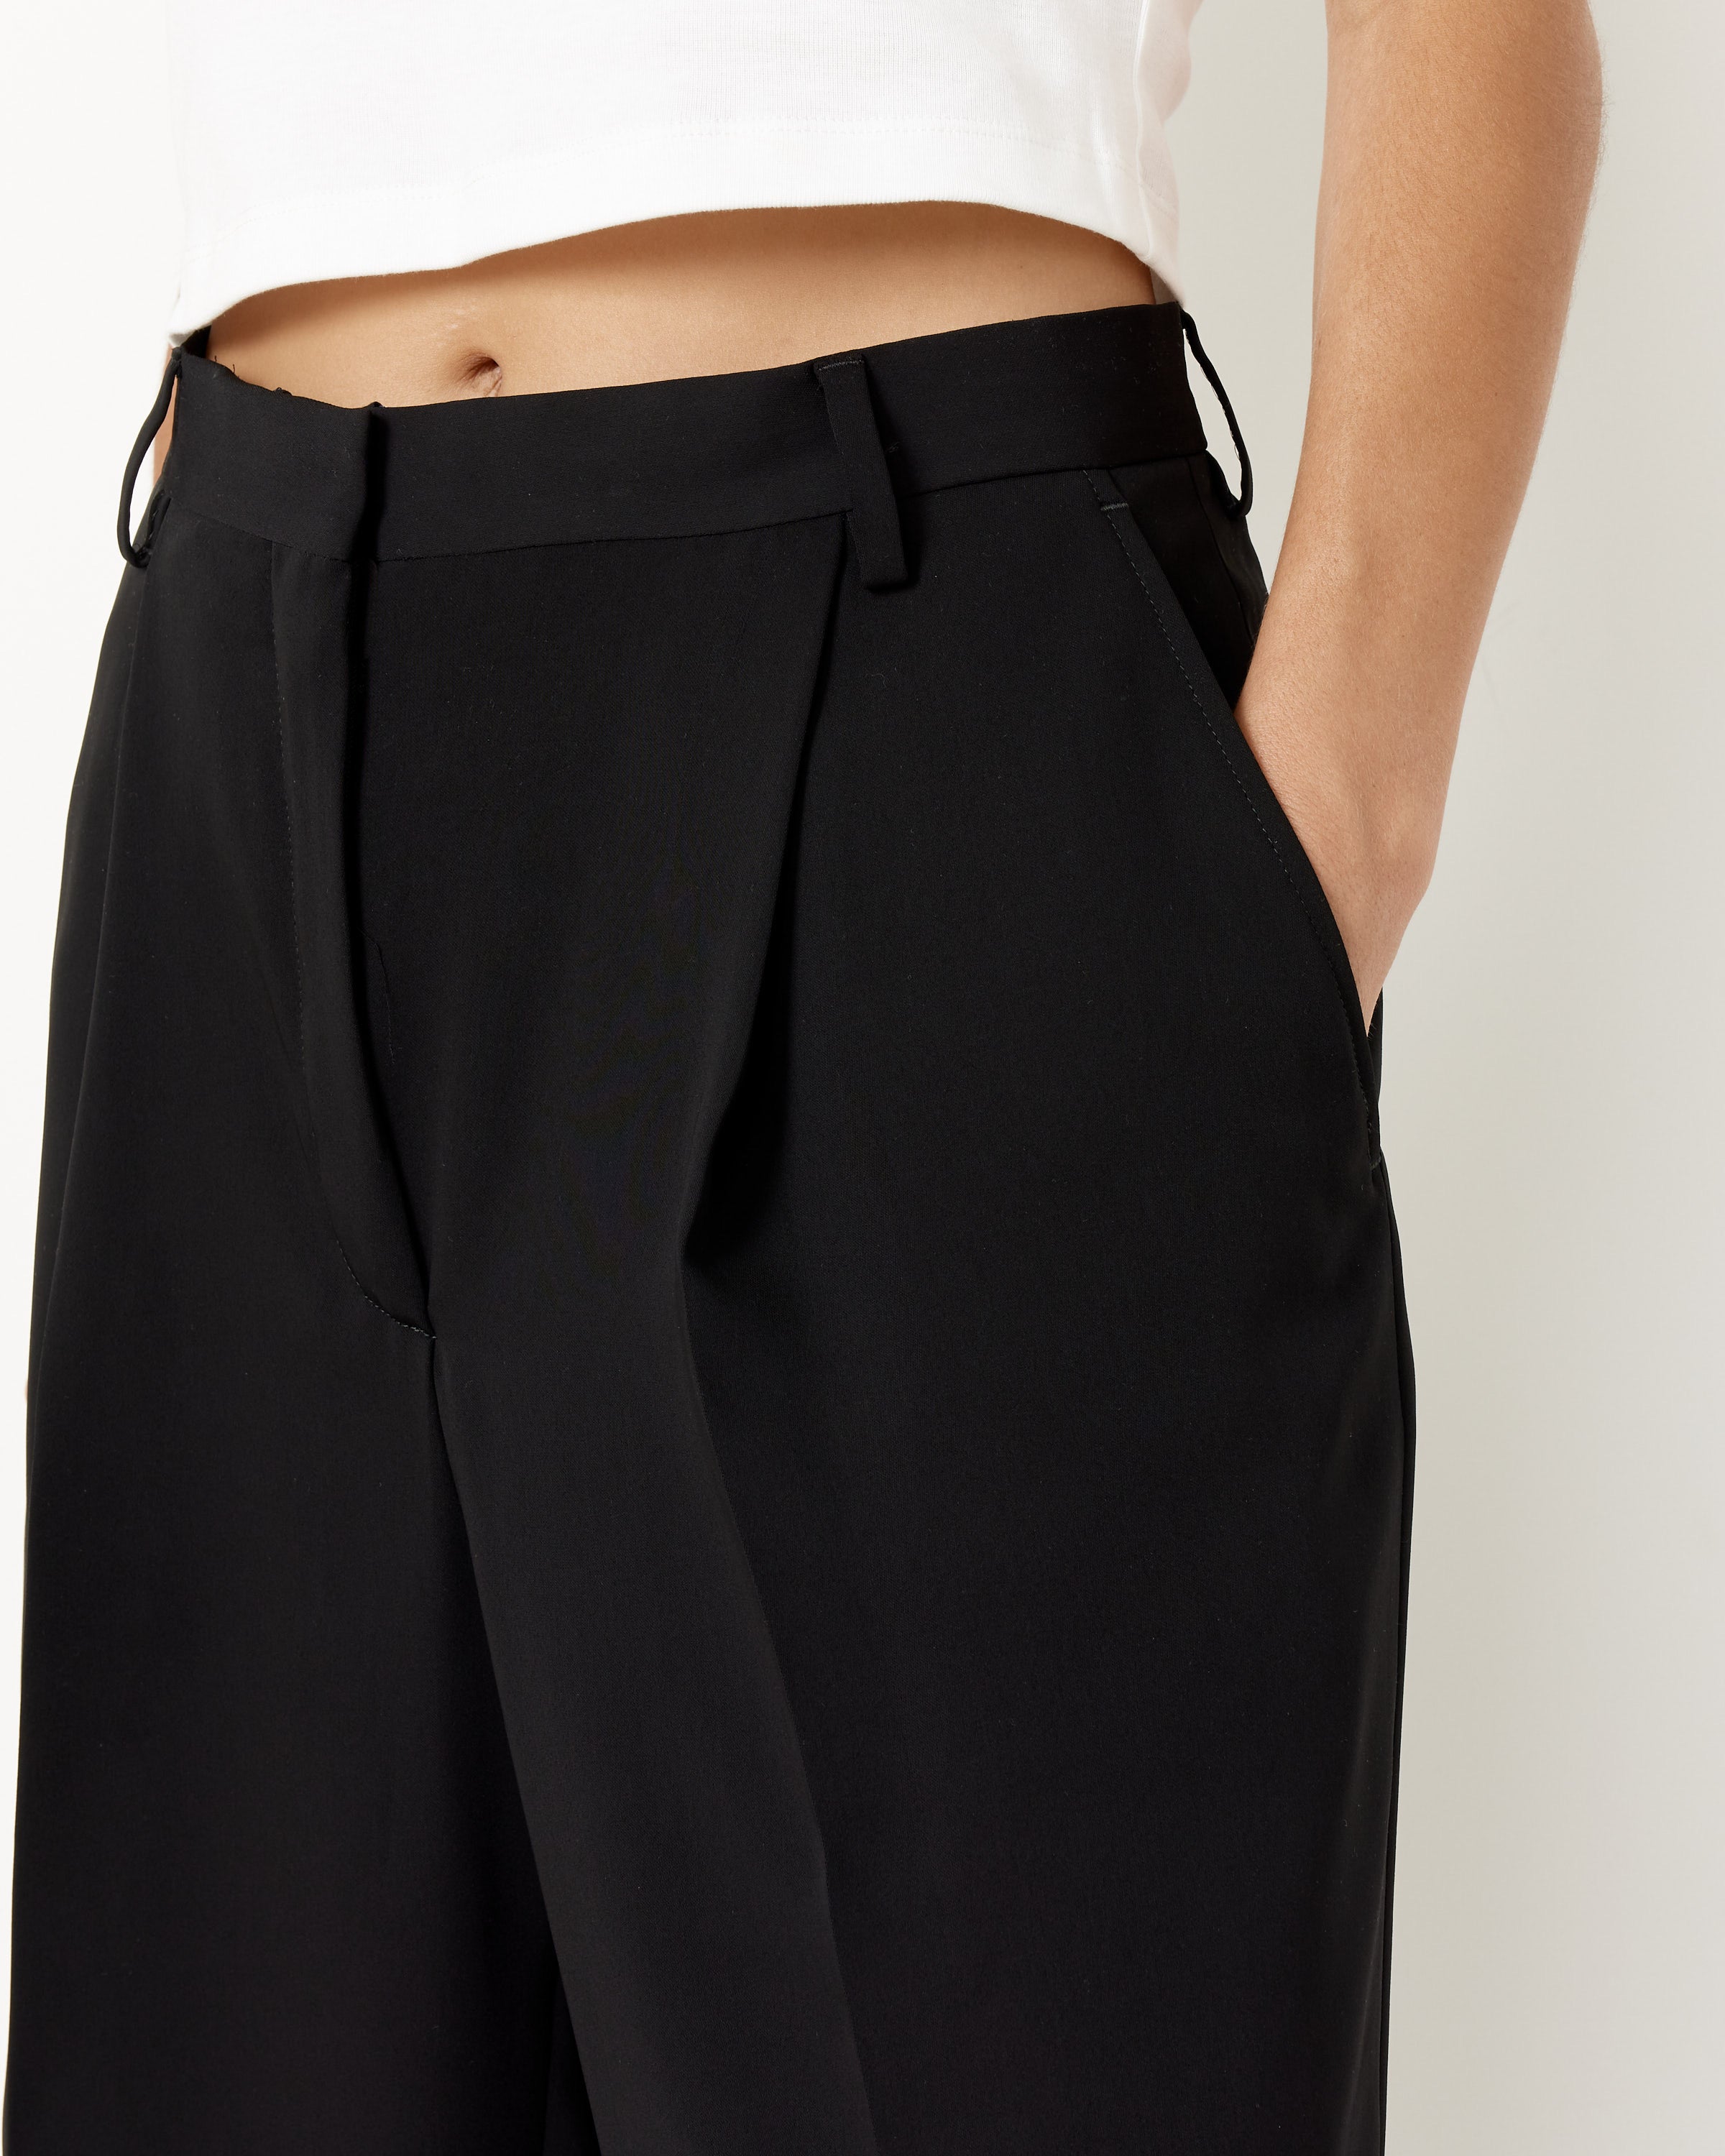 Cropped Wide Leg Trousers - Topshop USA | Cropped wide leg trousers,  Cropped trousers outfit, Topshop outfit